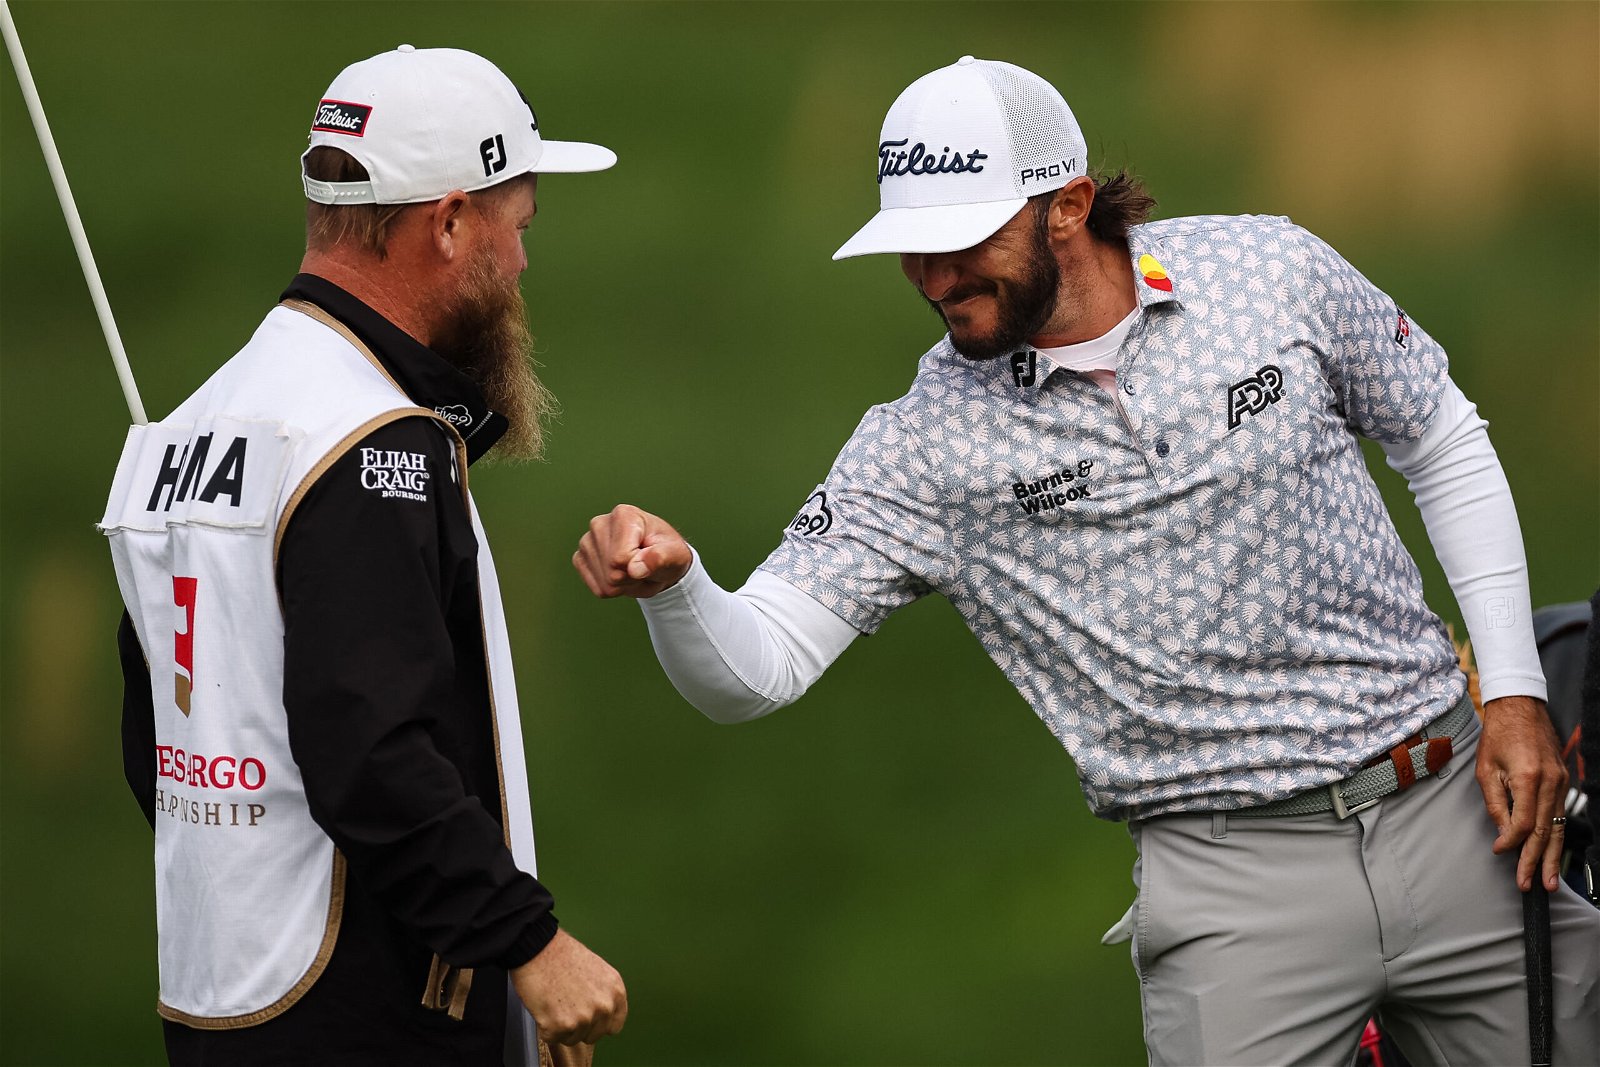 Betting odds on the pga championship eurovision 2022 betting results